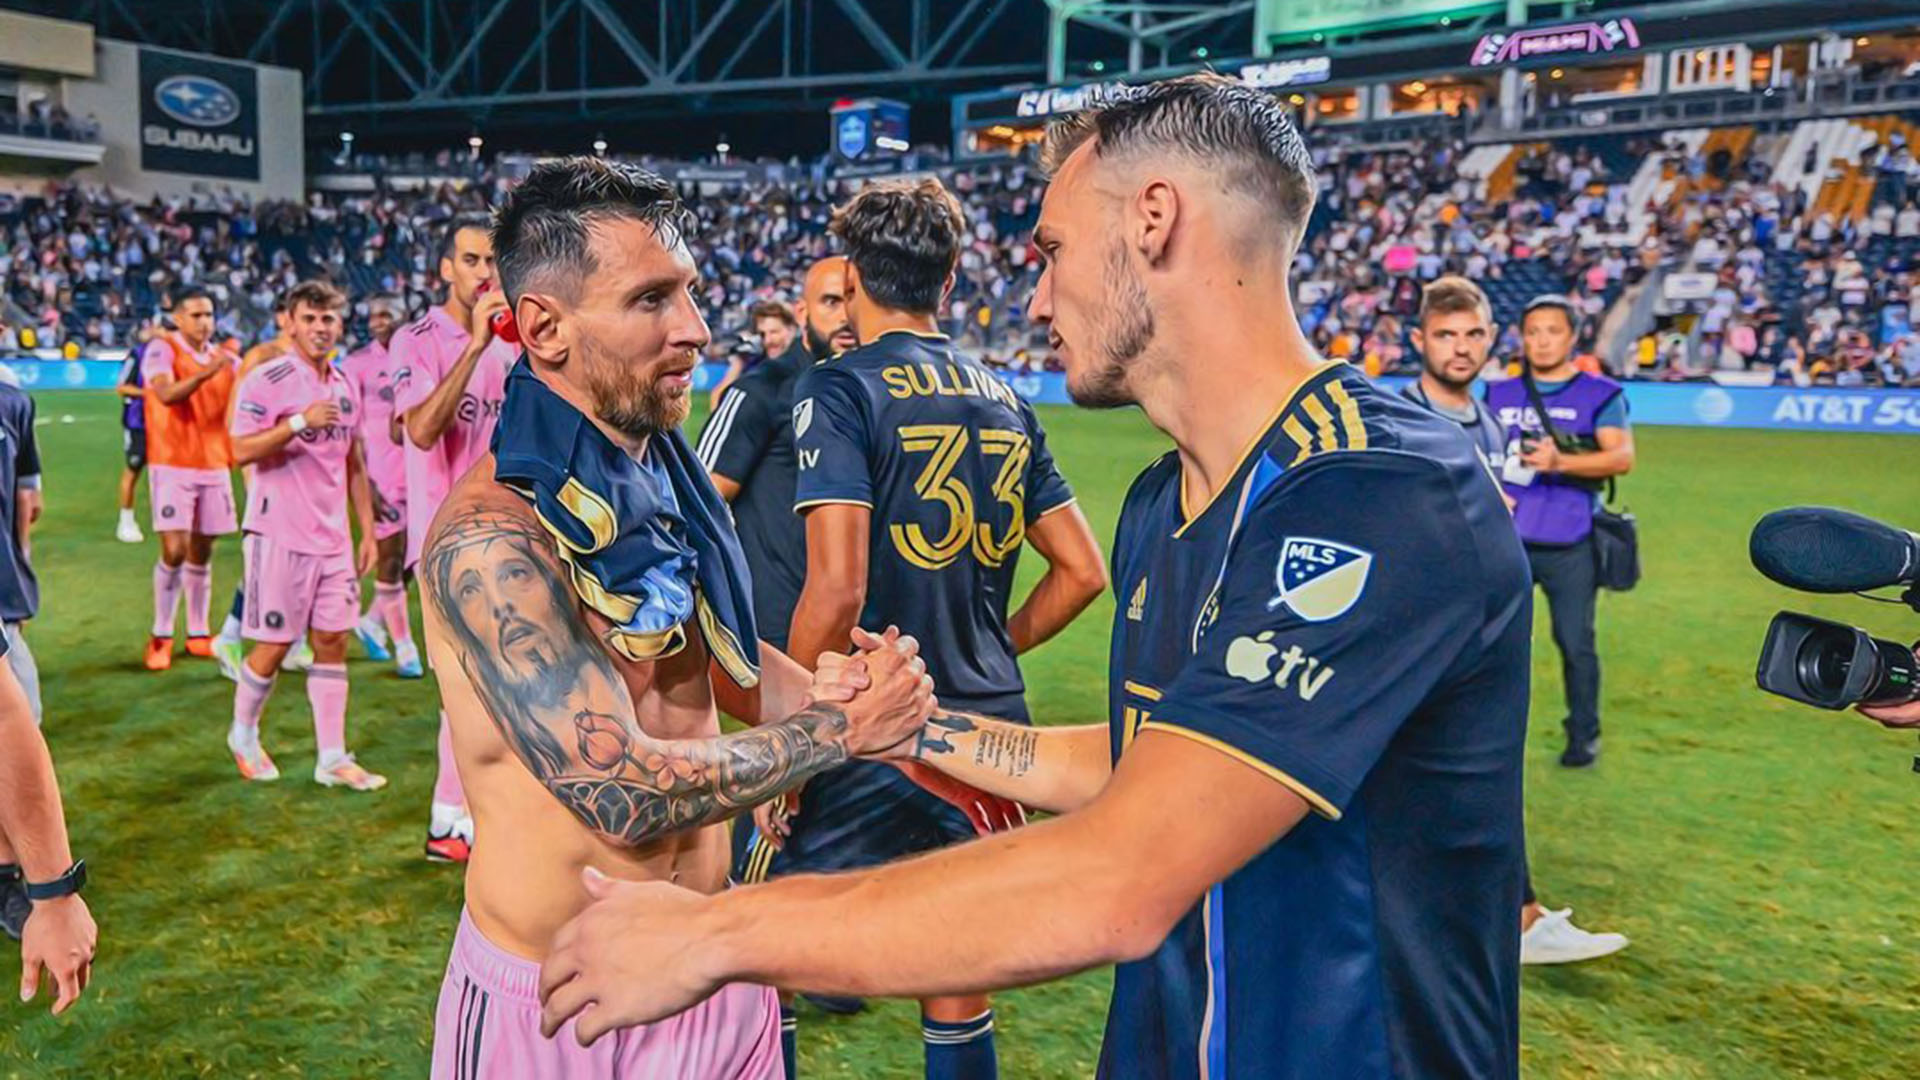 After the match against Inter Miami, Gazdag posted a photo with Messi that went viral. He said he had met his hero, and his partner commented on the post: “He never looks at me like that.”